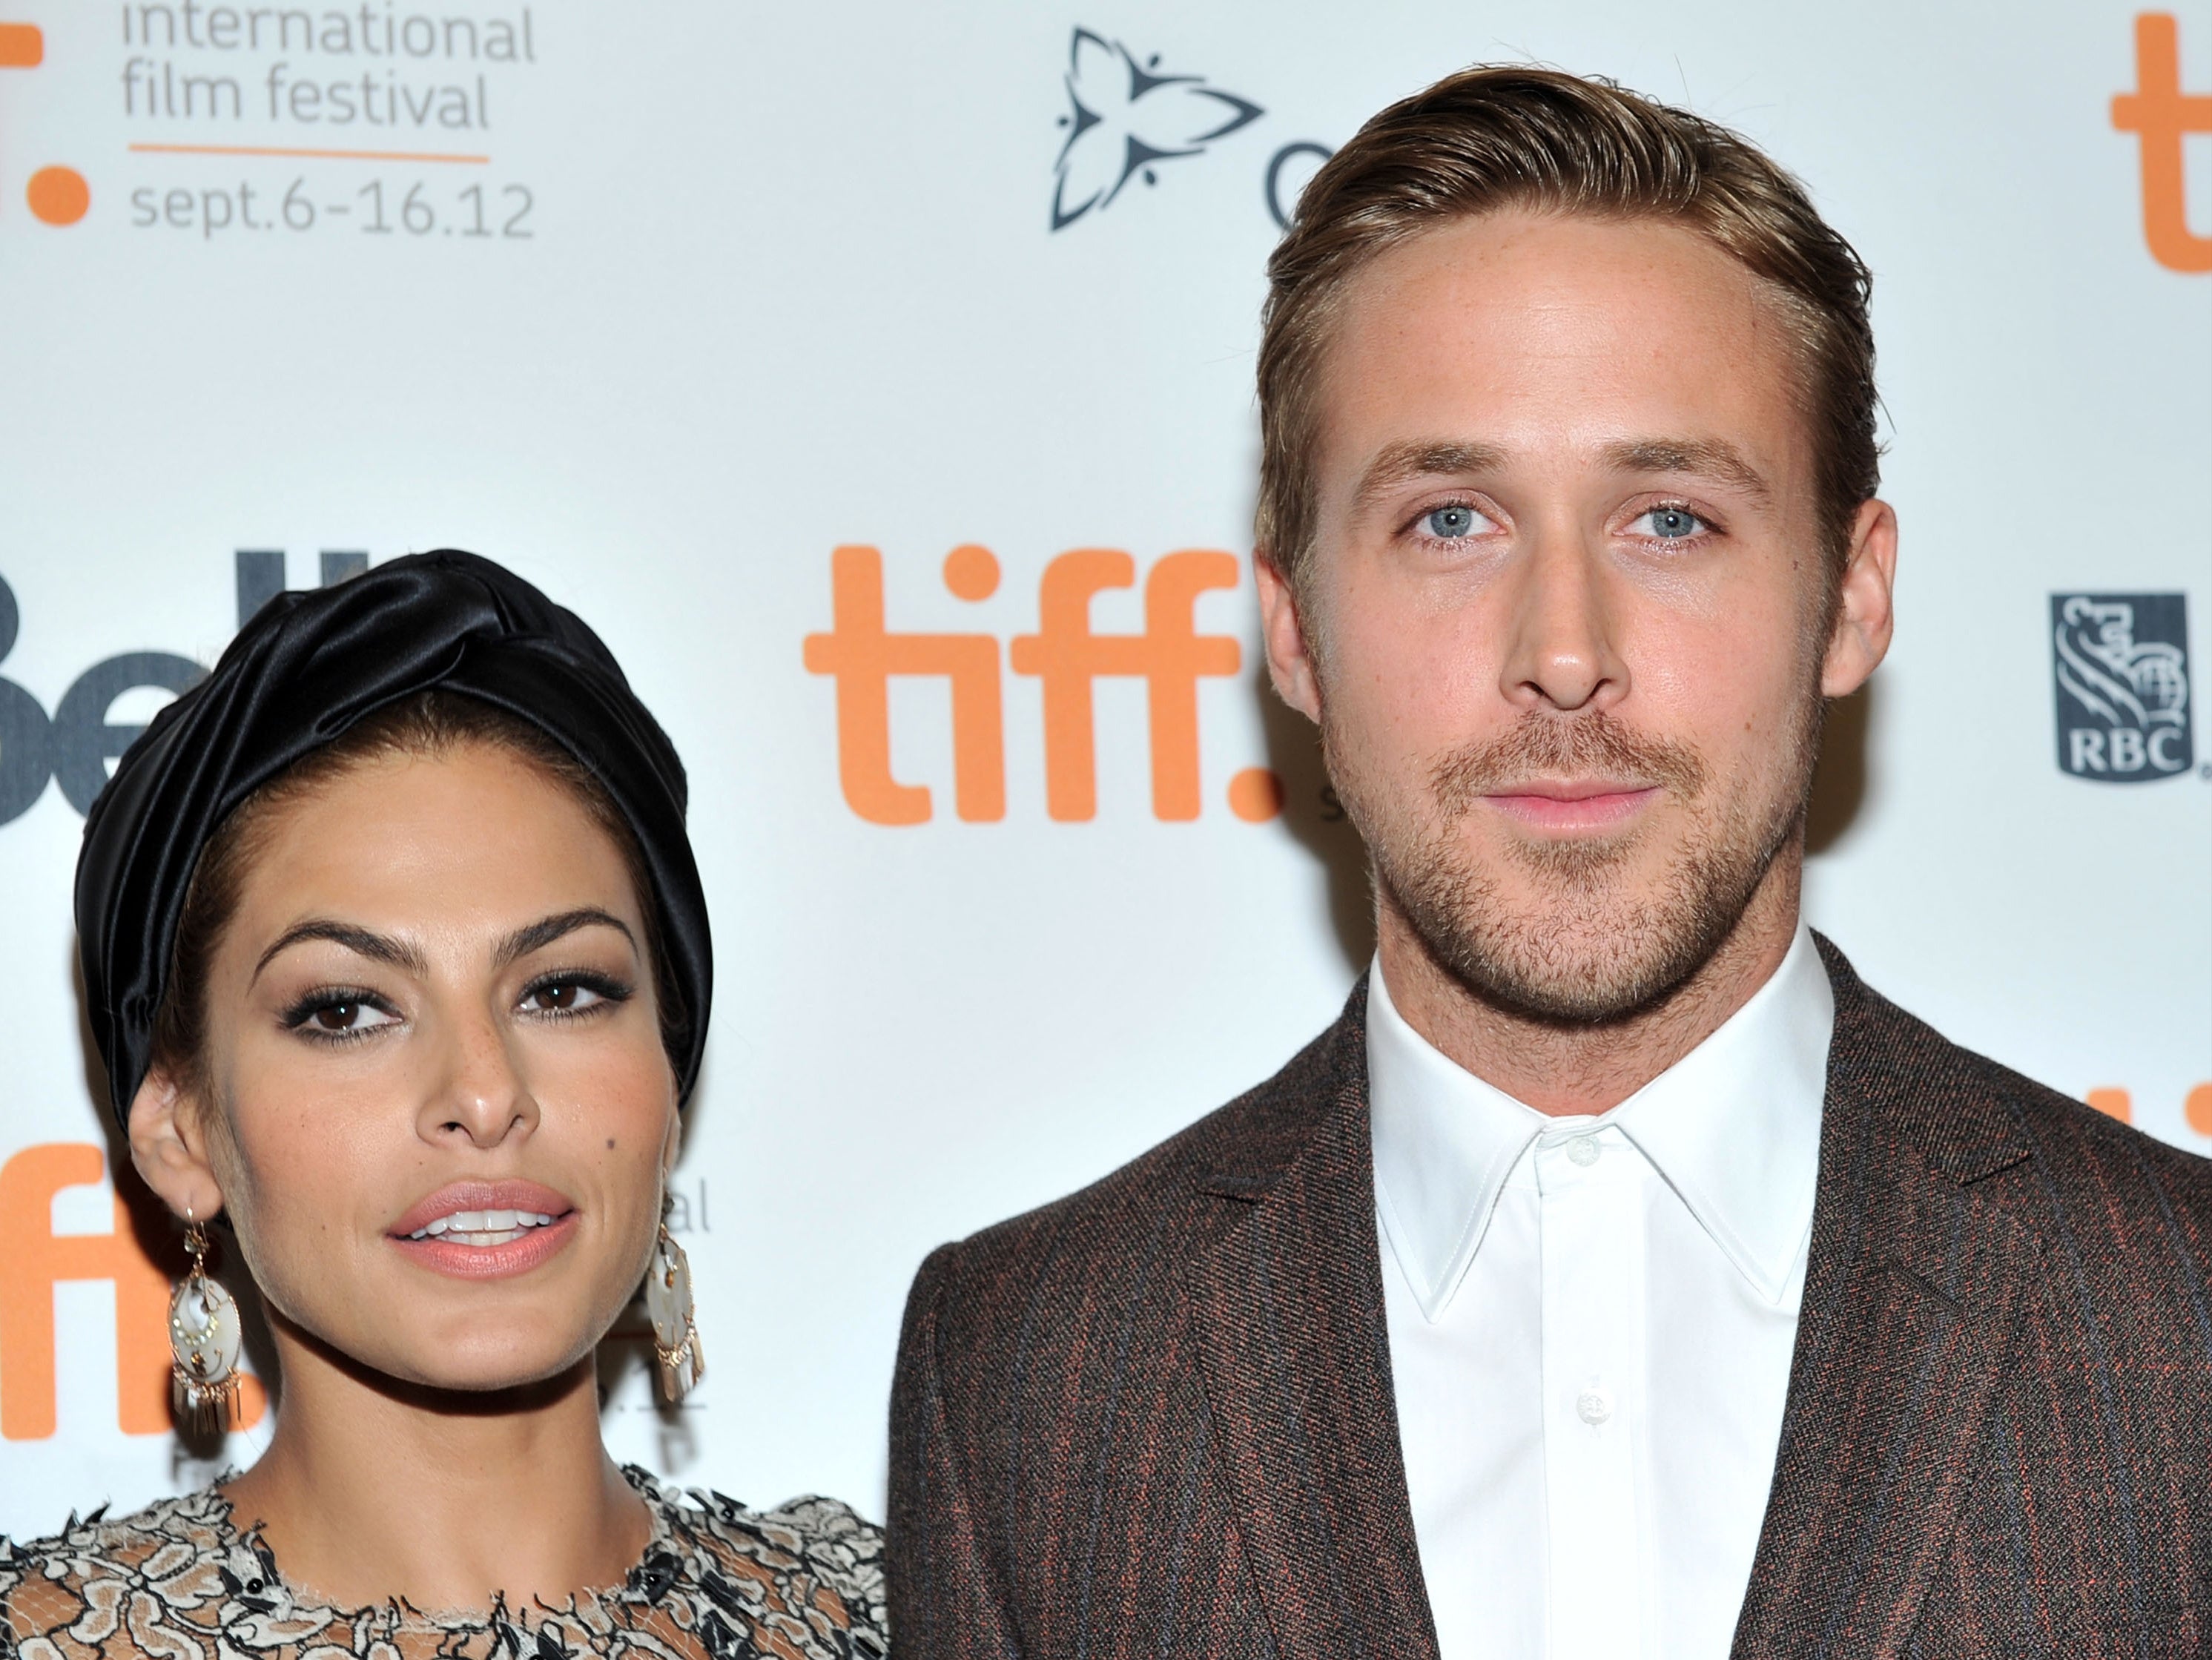 Ryan Gosling opens up about parenting amid the pandemic